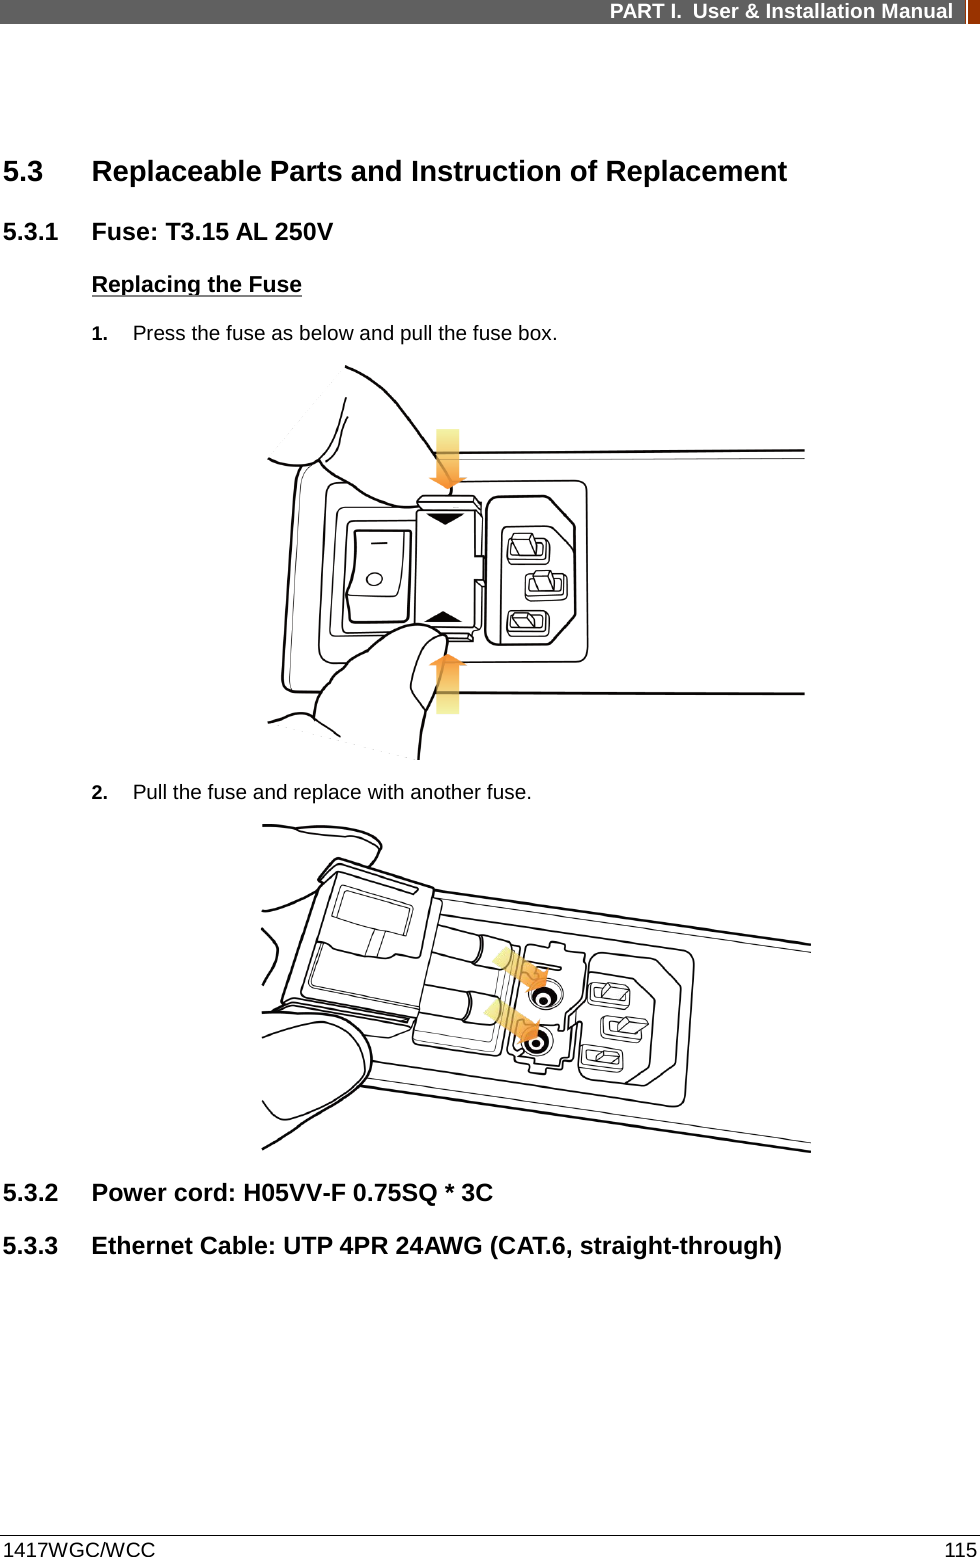 PART I. User &amp; Installation Manual  1417WGC/WCC 115  5.3 Replaceable Parts and Instruction of Replacement 5.3.1 Fuse: T3.15 AL 250V Replacing the Fuse 1. Press the fuse as below and pull the fuse box.  2. Pull the fuse and replace with another fuse.  5.3.2 Power cord: H05VV-F 0.75SQ * 3C 5.3.3 Ethernet Cable: UTP 4PR 24AWG (CAT.6, straight-through) 